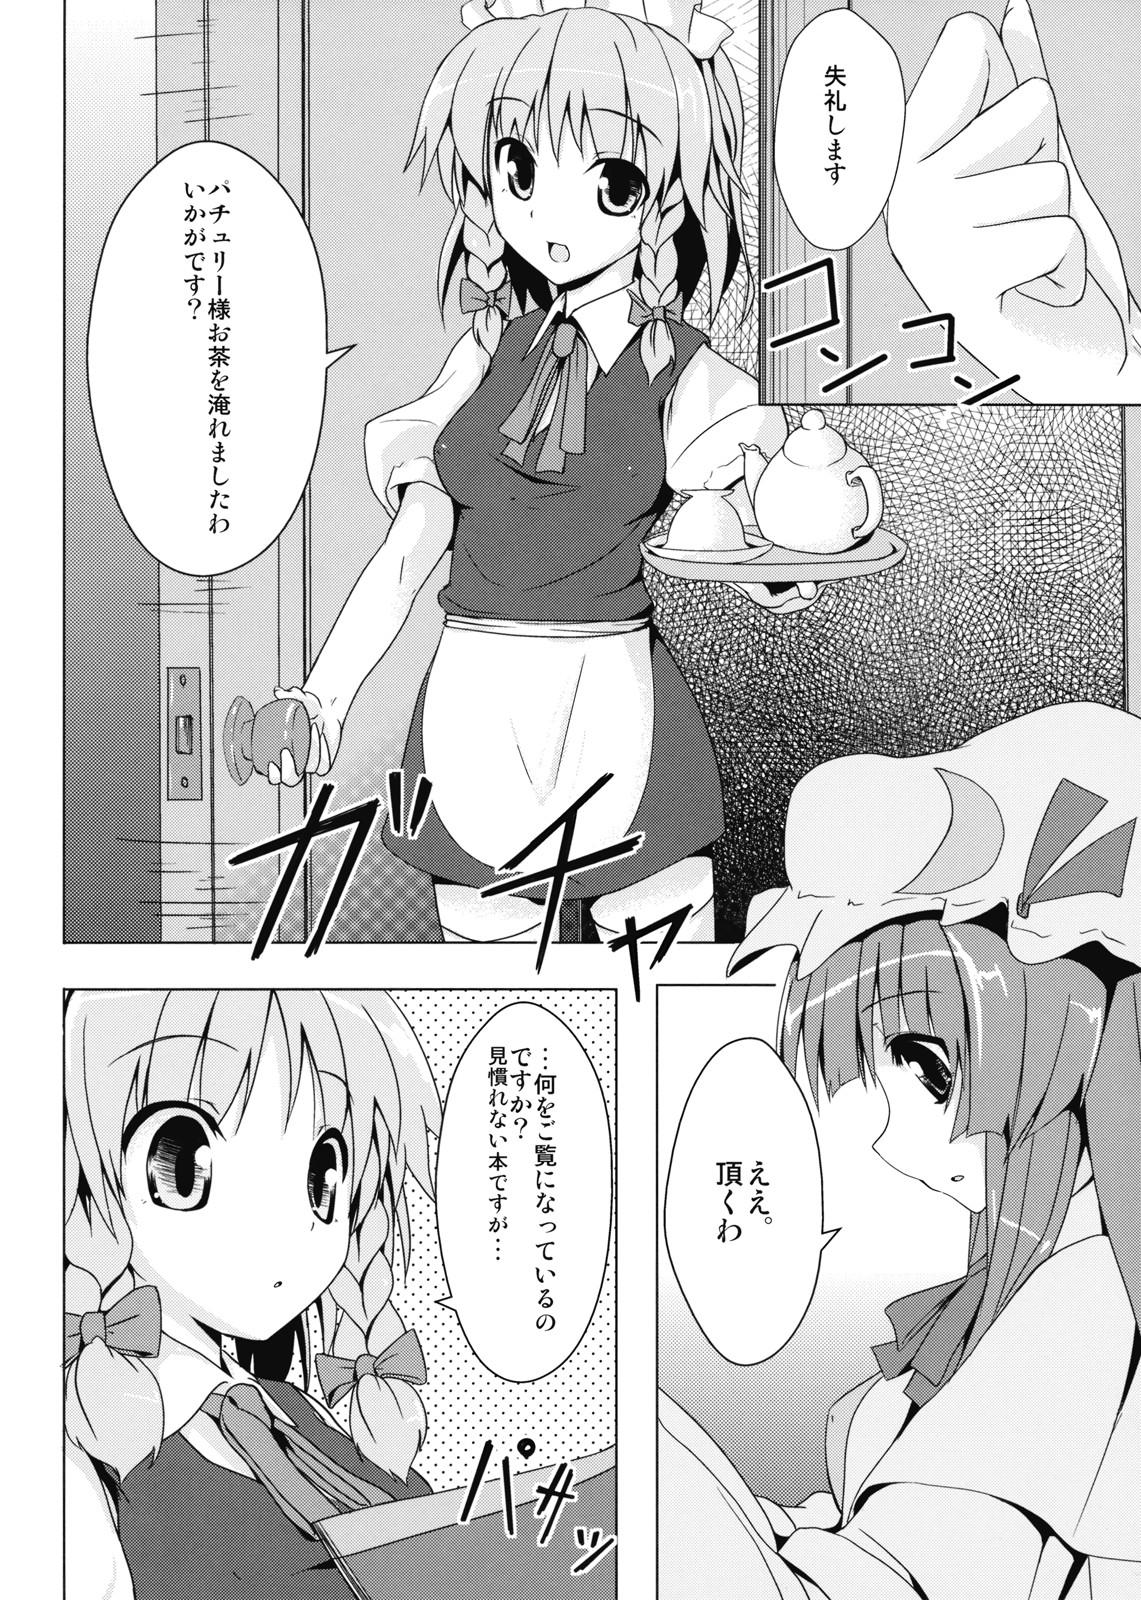 Ex Gf Himitsu no Ehon - Touhou project Officesex - Page 6